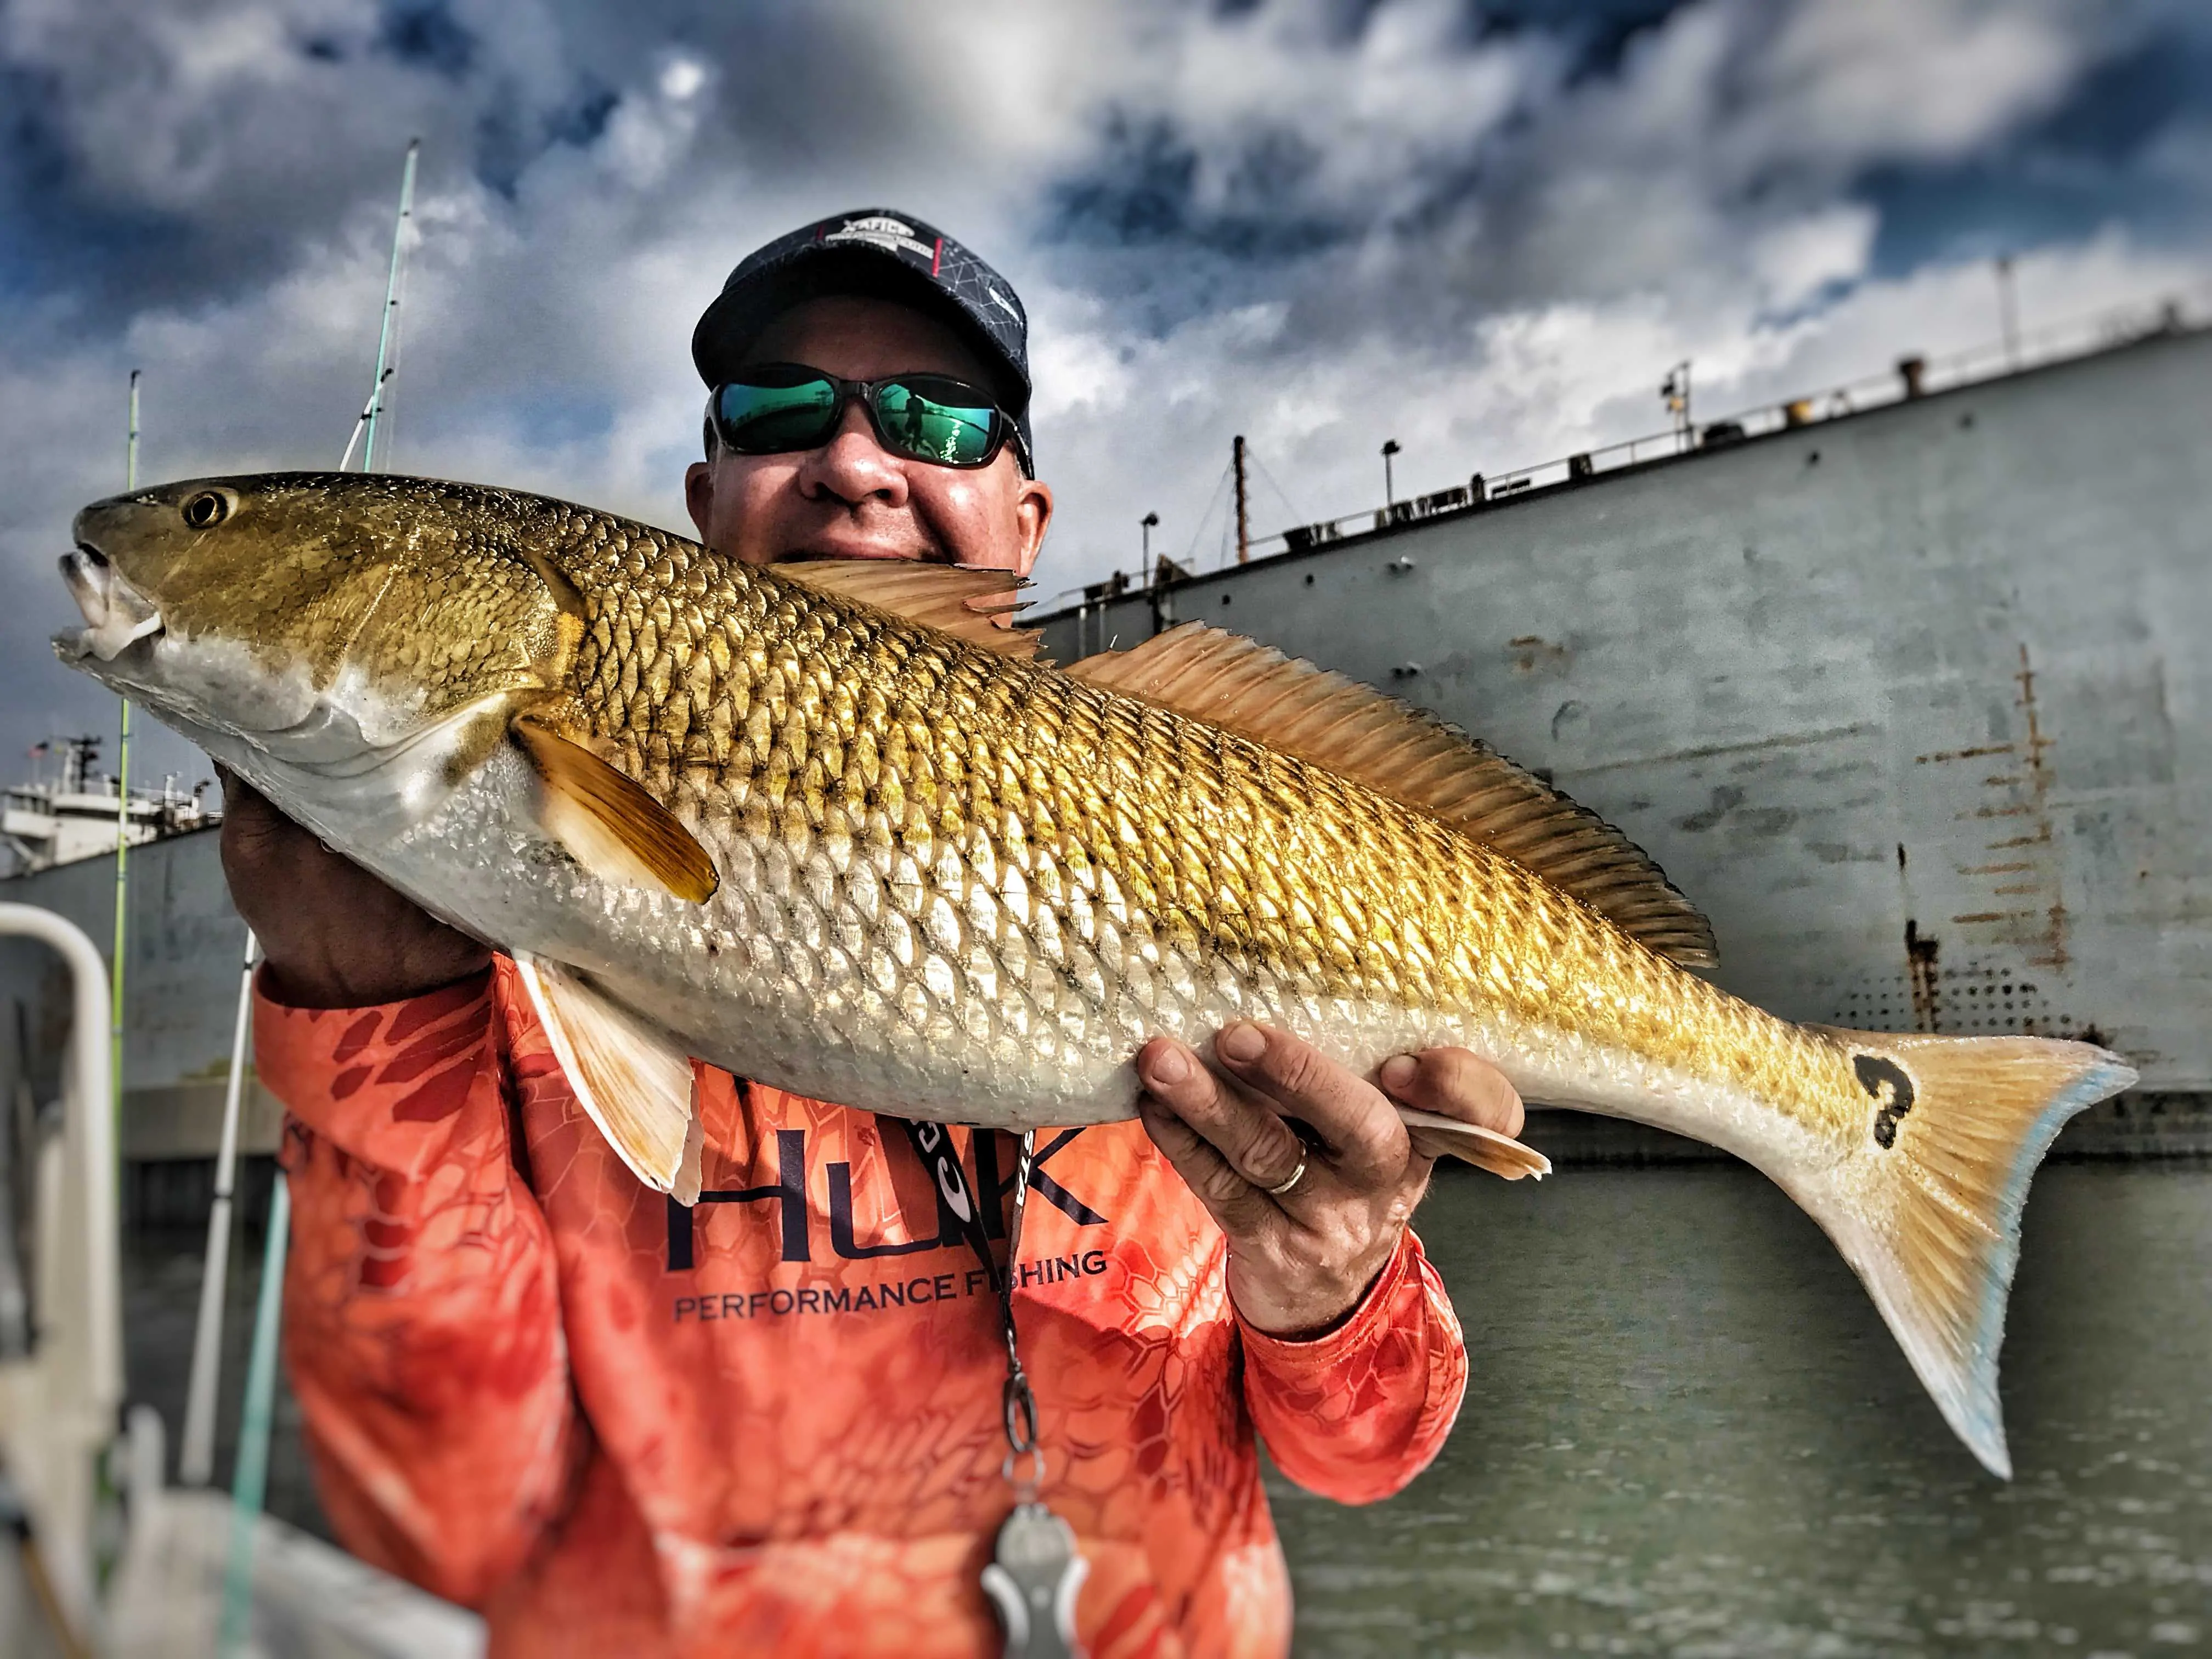 man-holding-redfish-with-question-mark-spot-on-tail